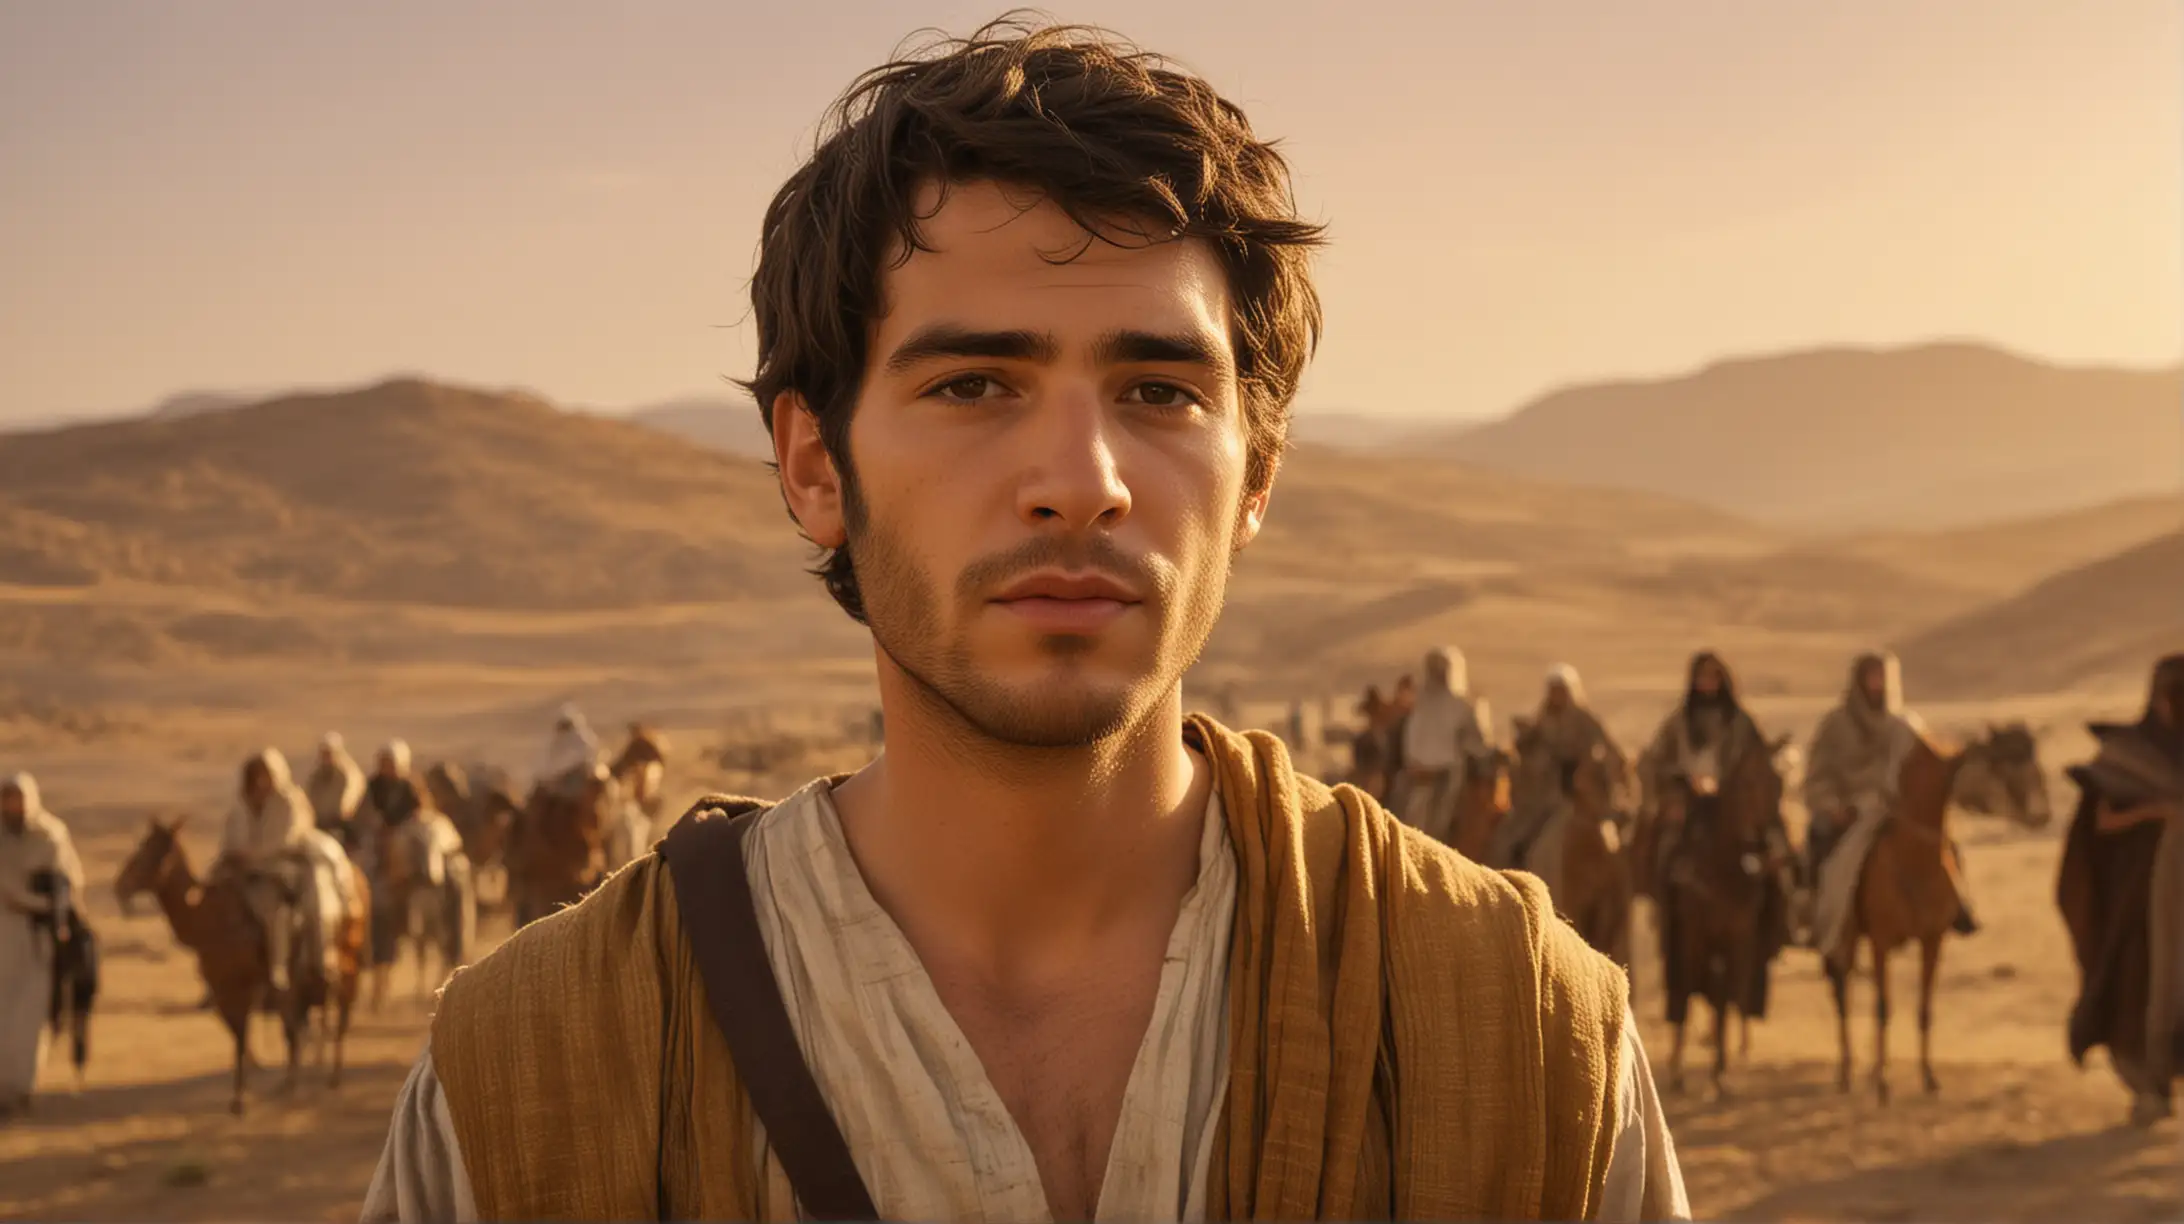 Ezra in the Desert with Followers and Golden Sky